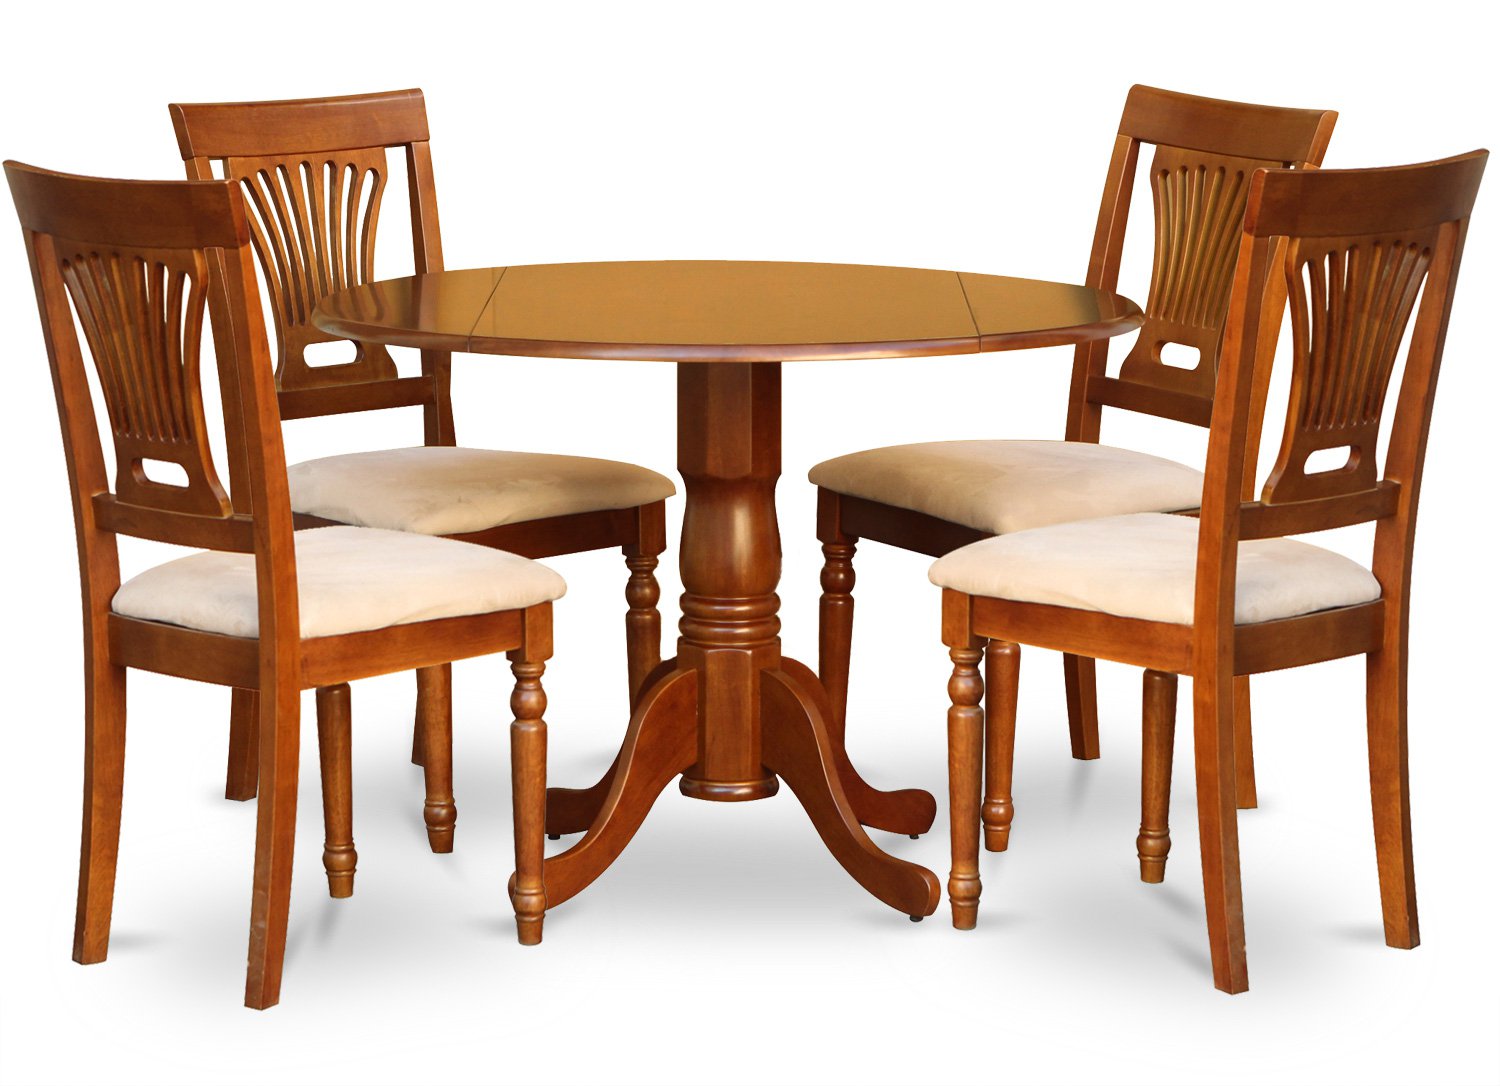 Kitchen Round Table Set : Round Dining Table Set with Leaf - HomesFeed : Round kitchen & dining room sets :